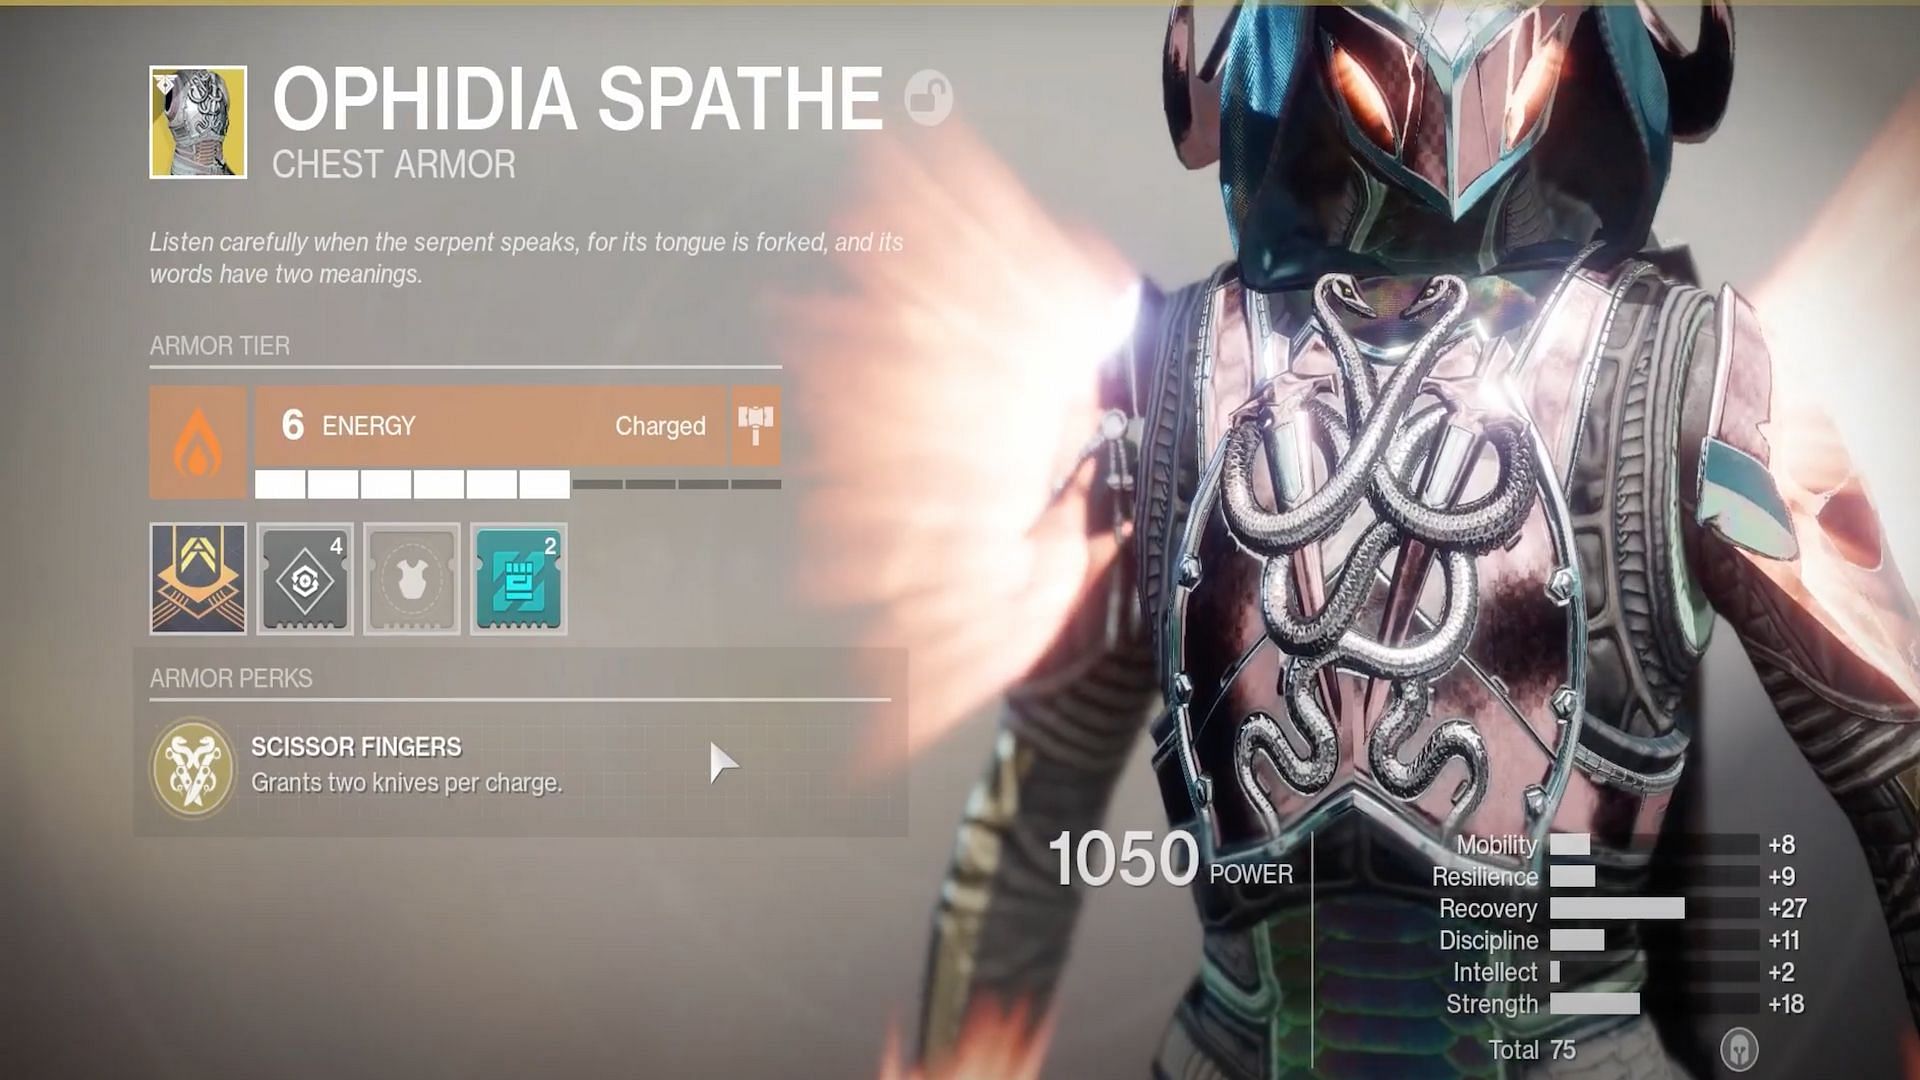 Get the powerful Ophidia Spathe through world drops or by purchasing from Xur (Image via Nogardborn/YouTube)